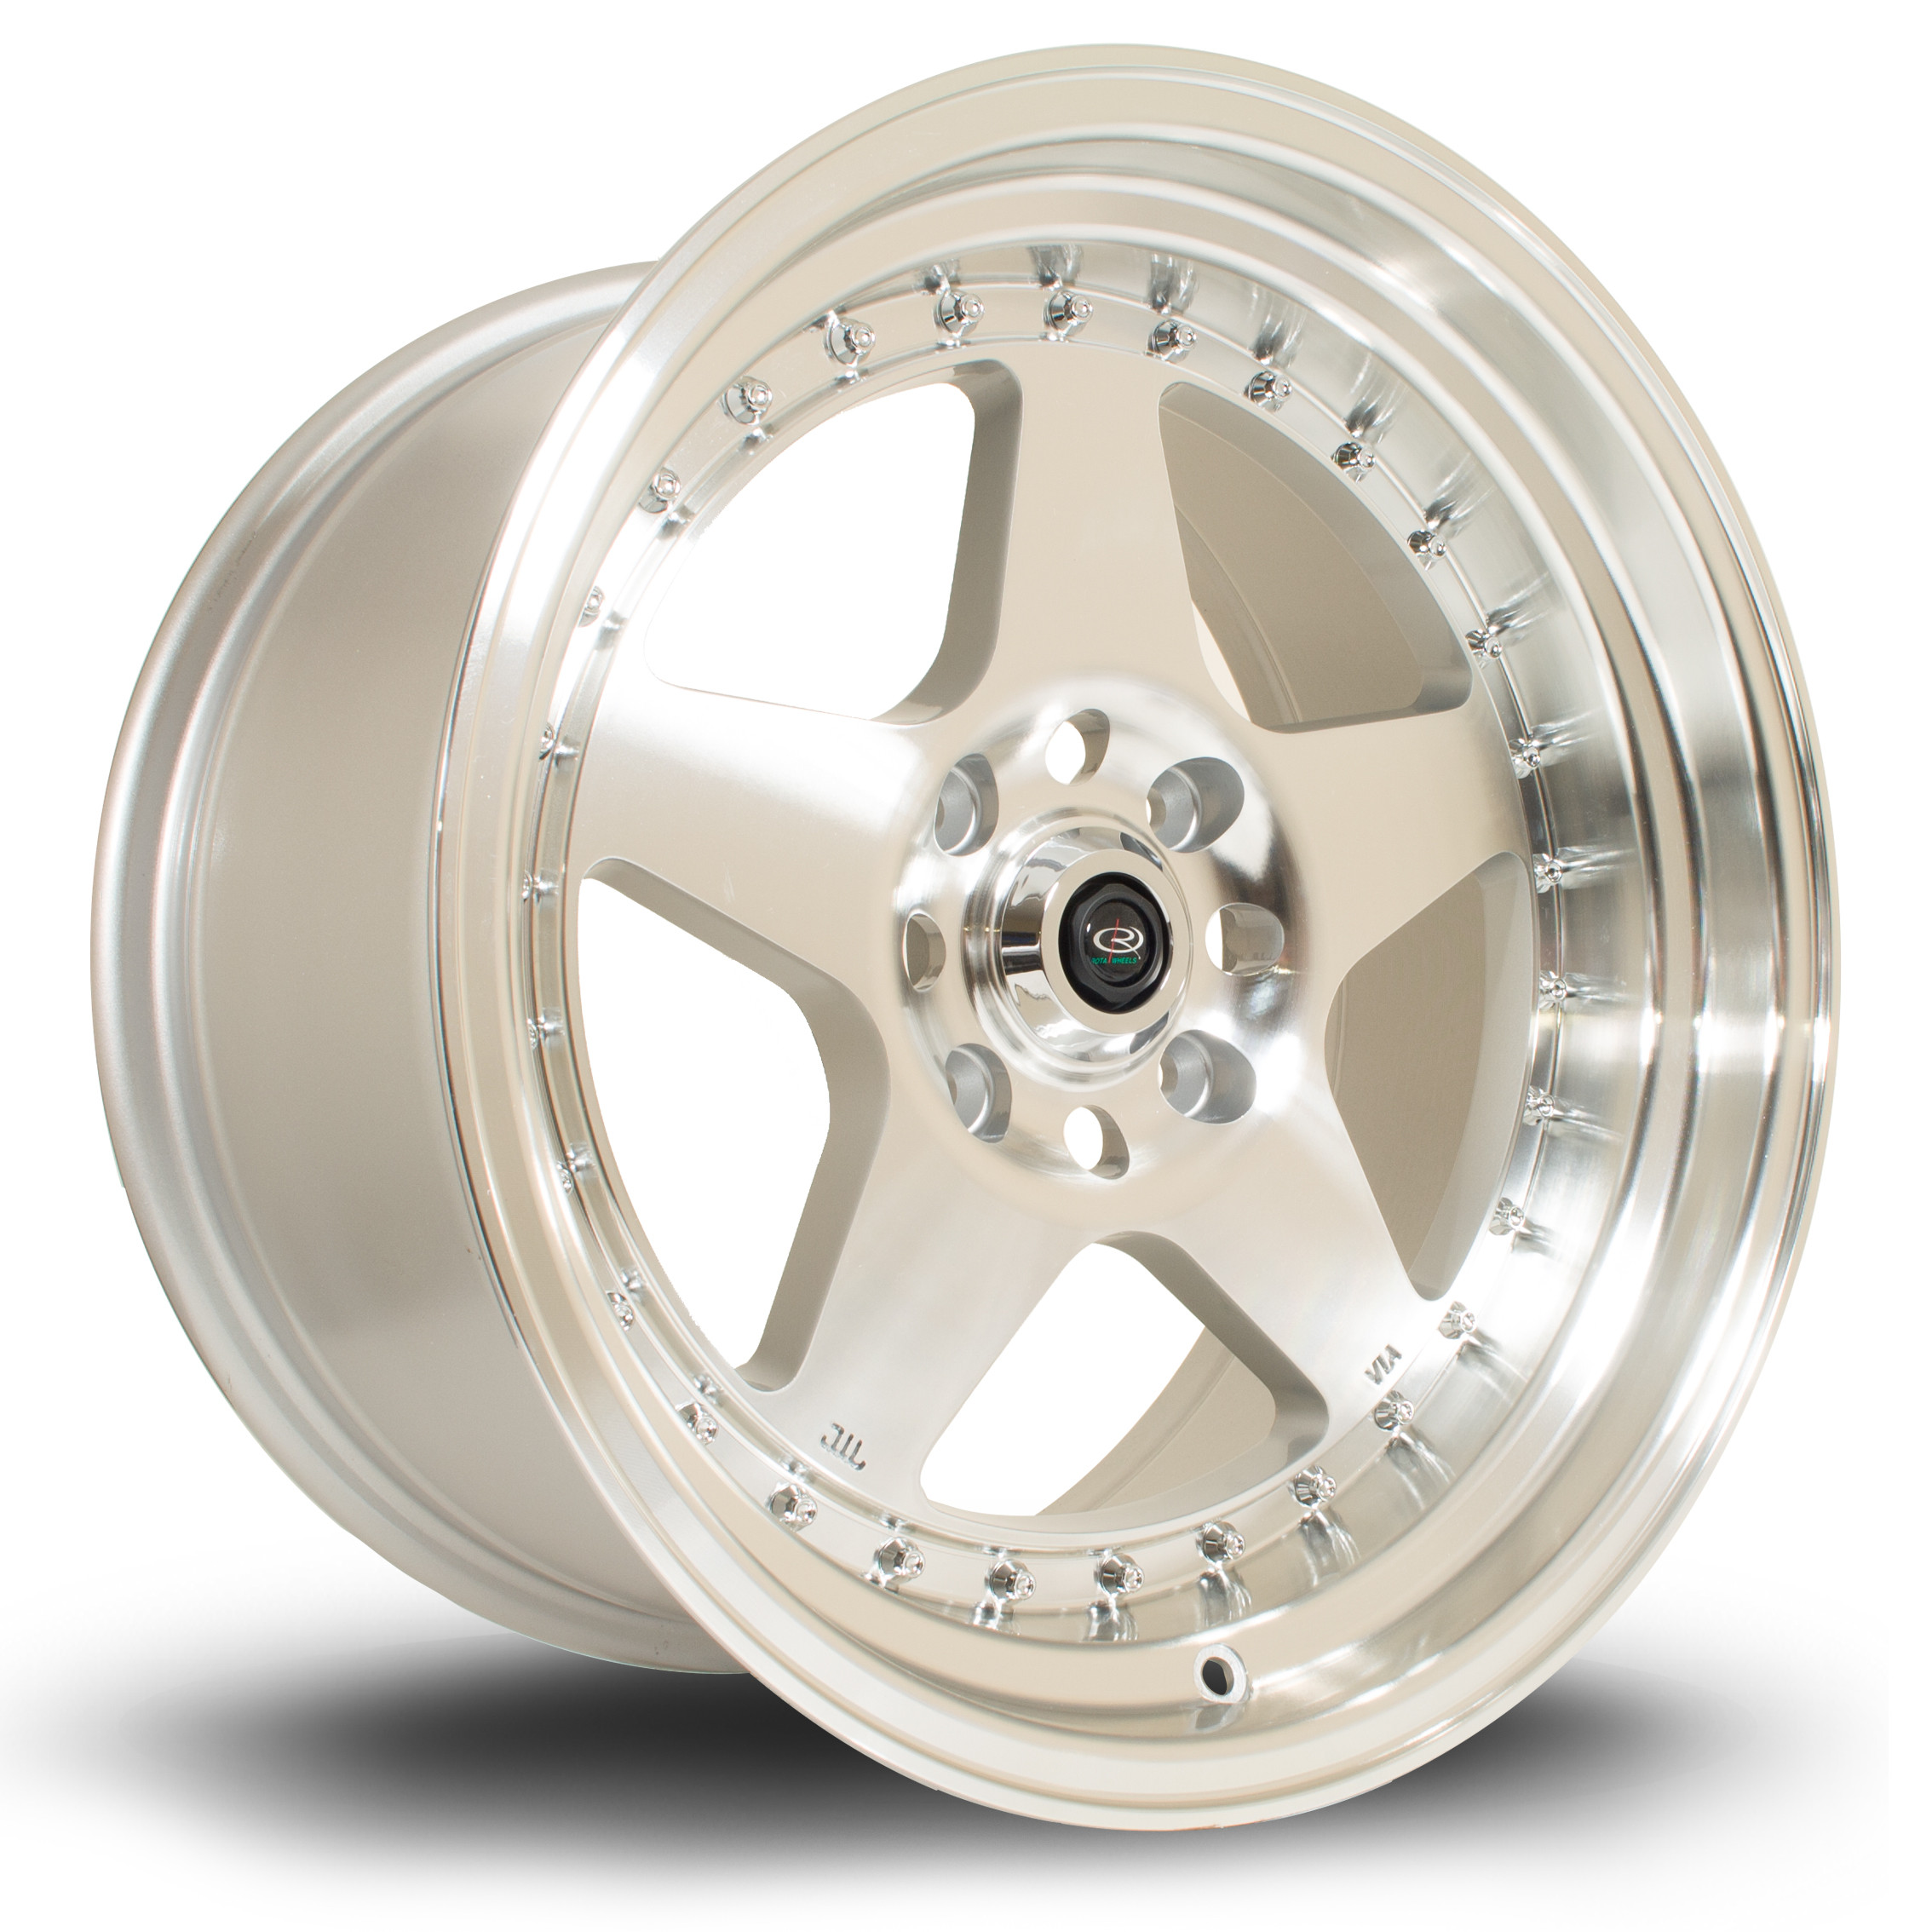 Kyusha 17x9 4x114 ET0 Silver with Polished Face